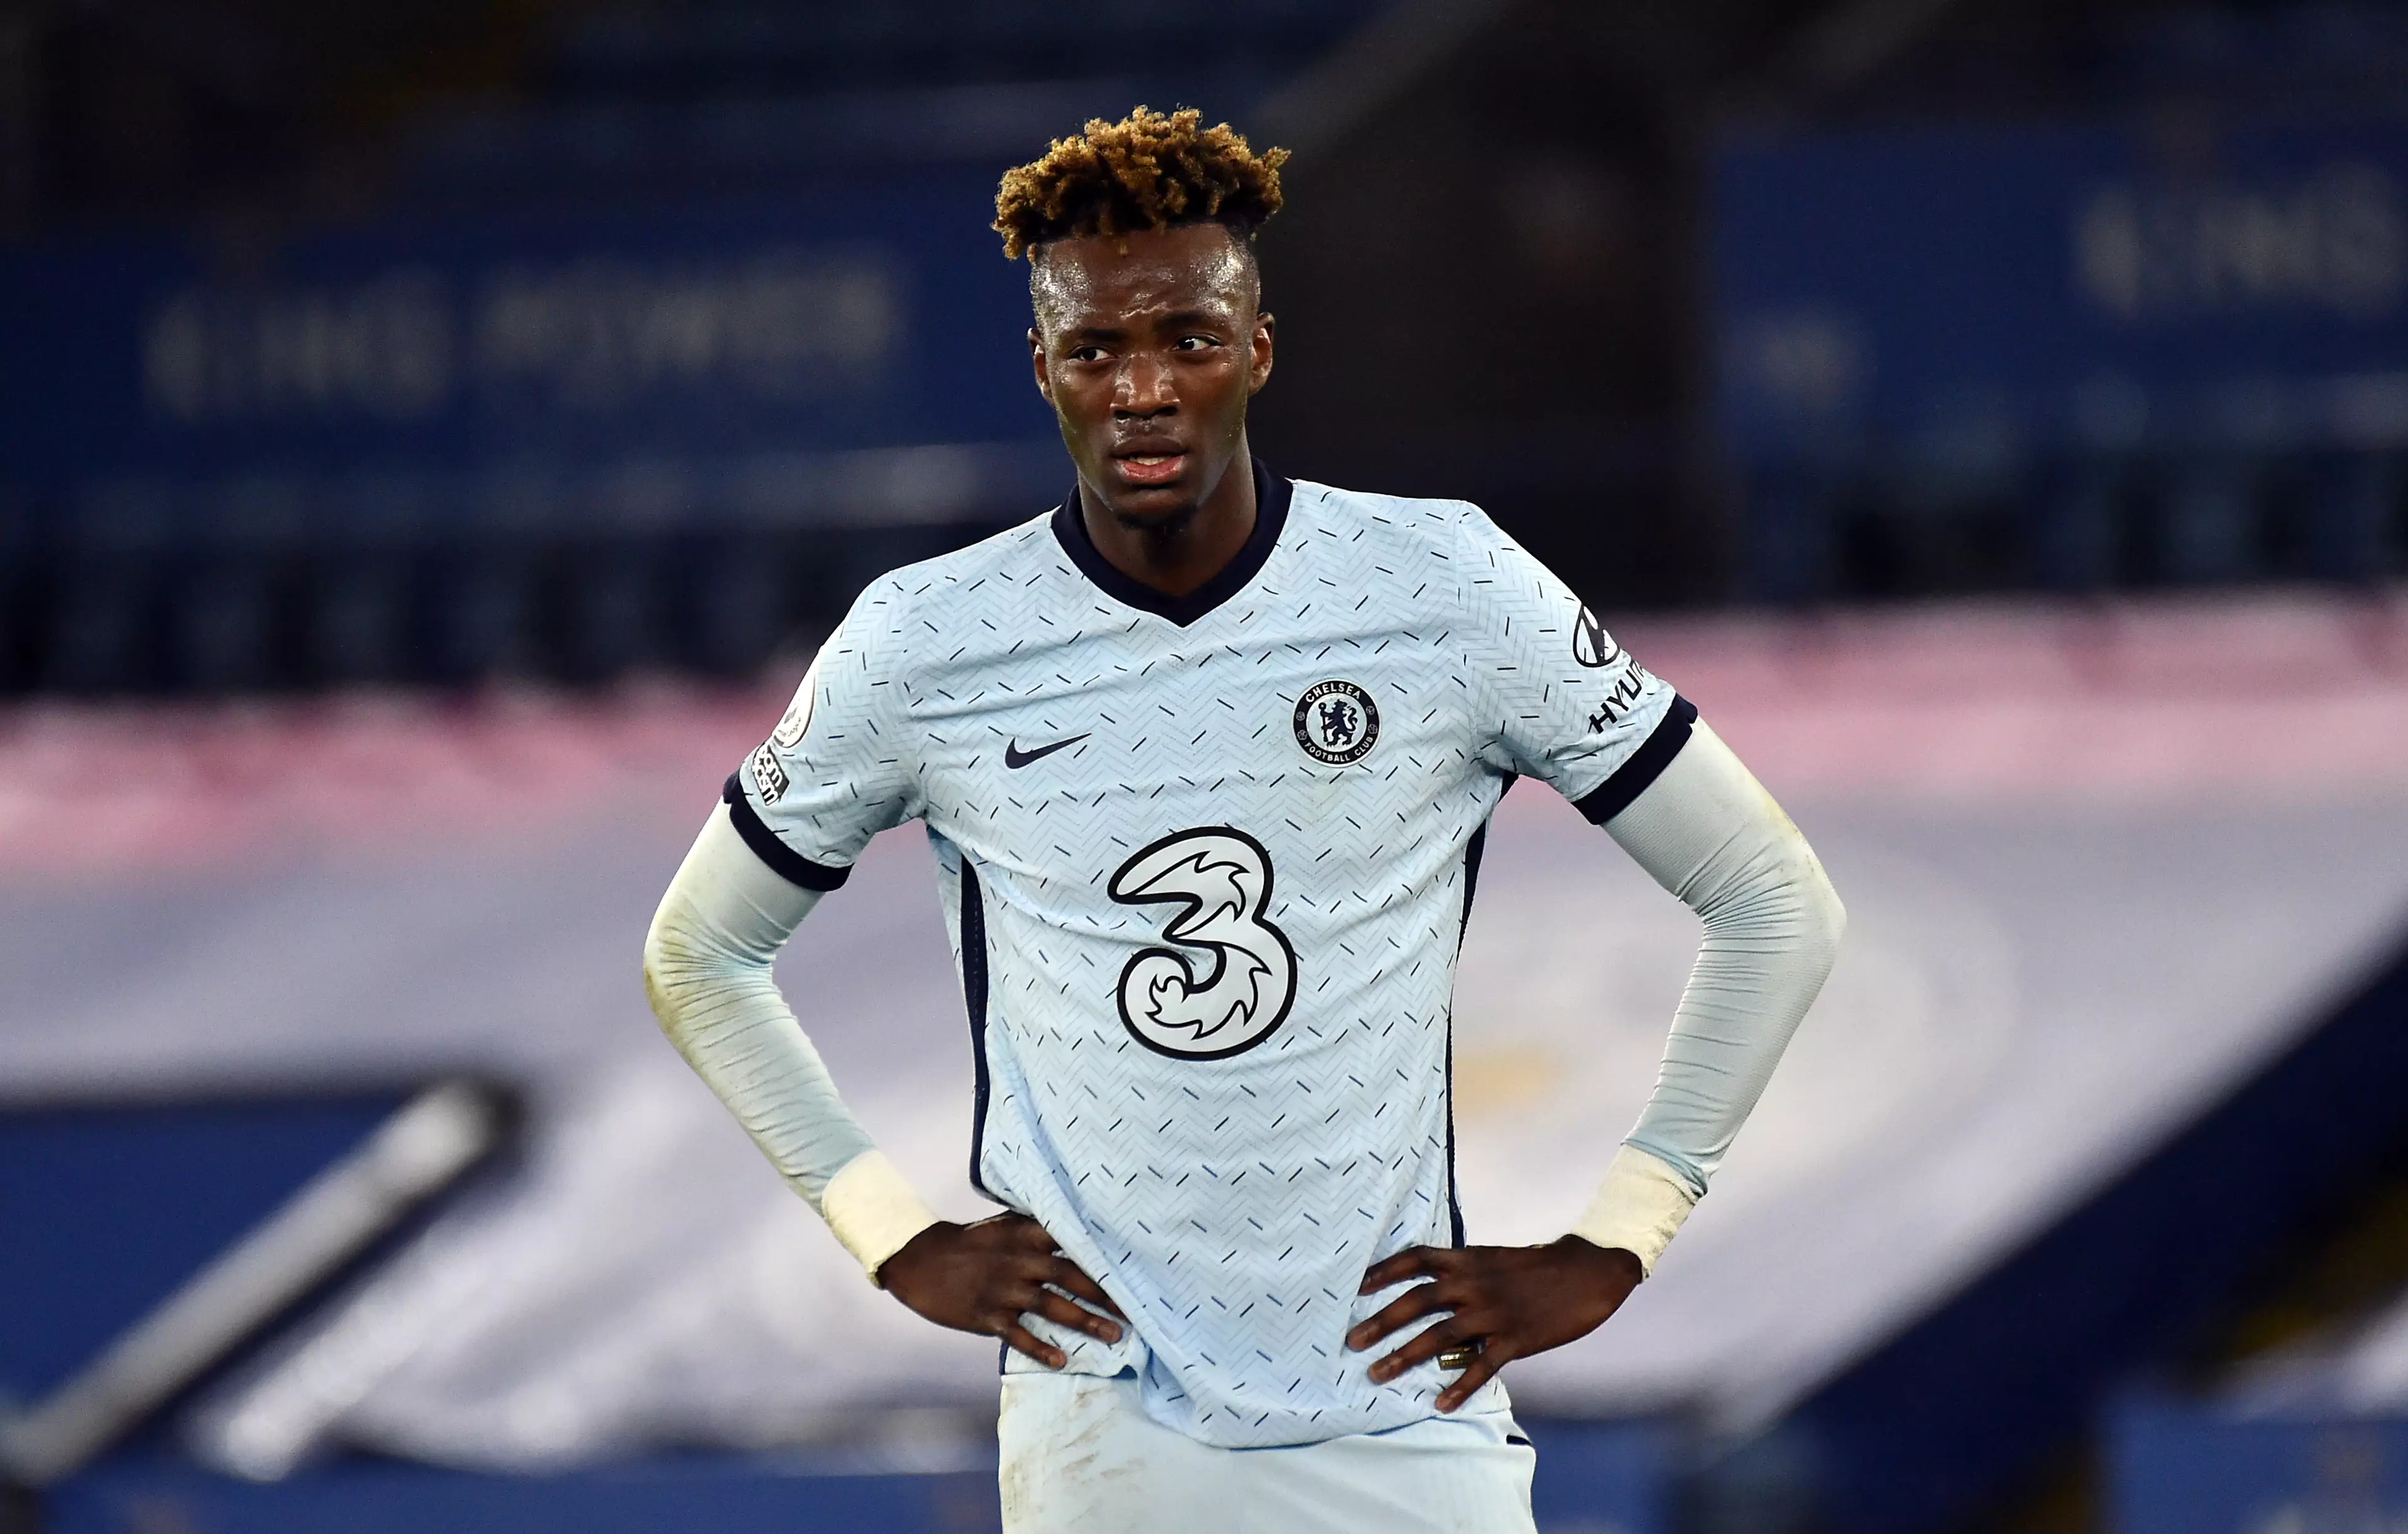 Tammy Abraham barely featured for Chelsea last season